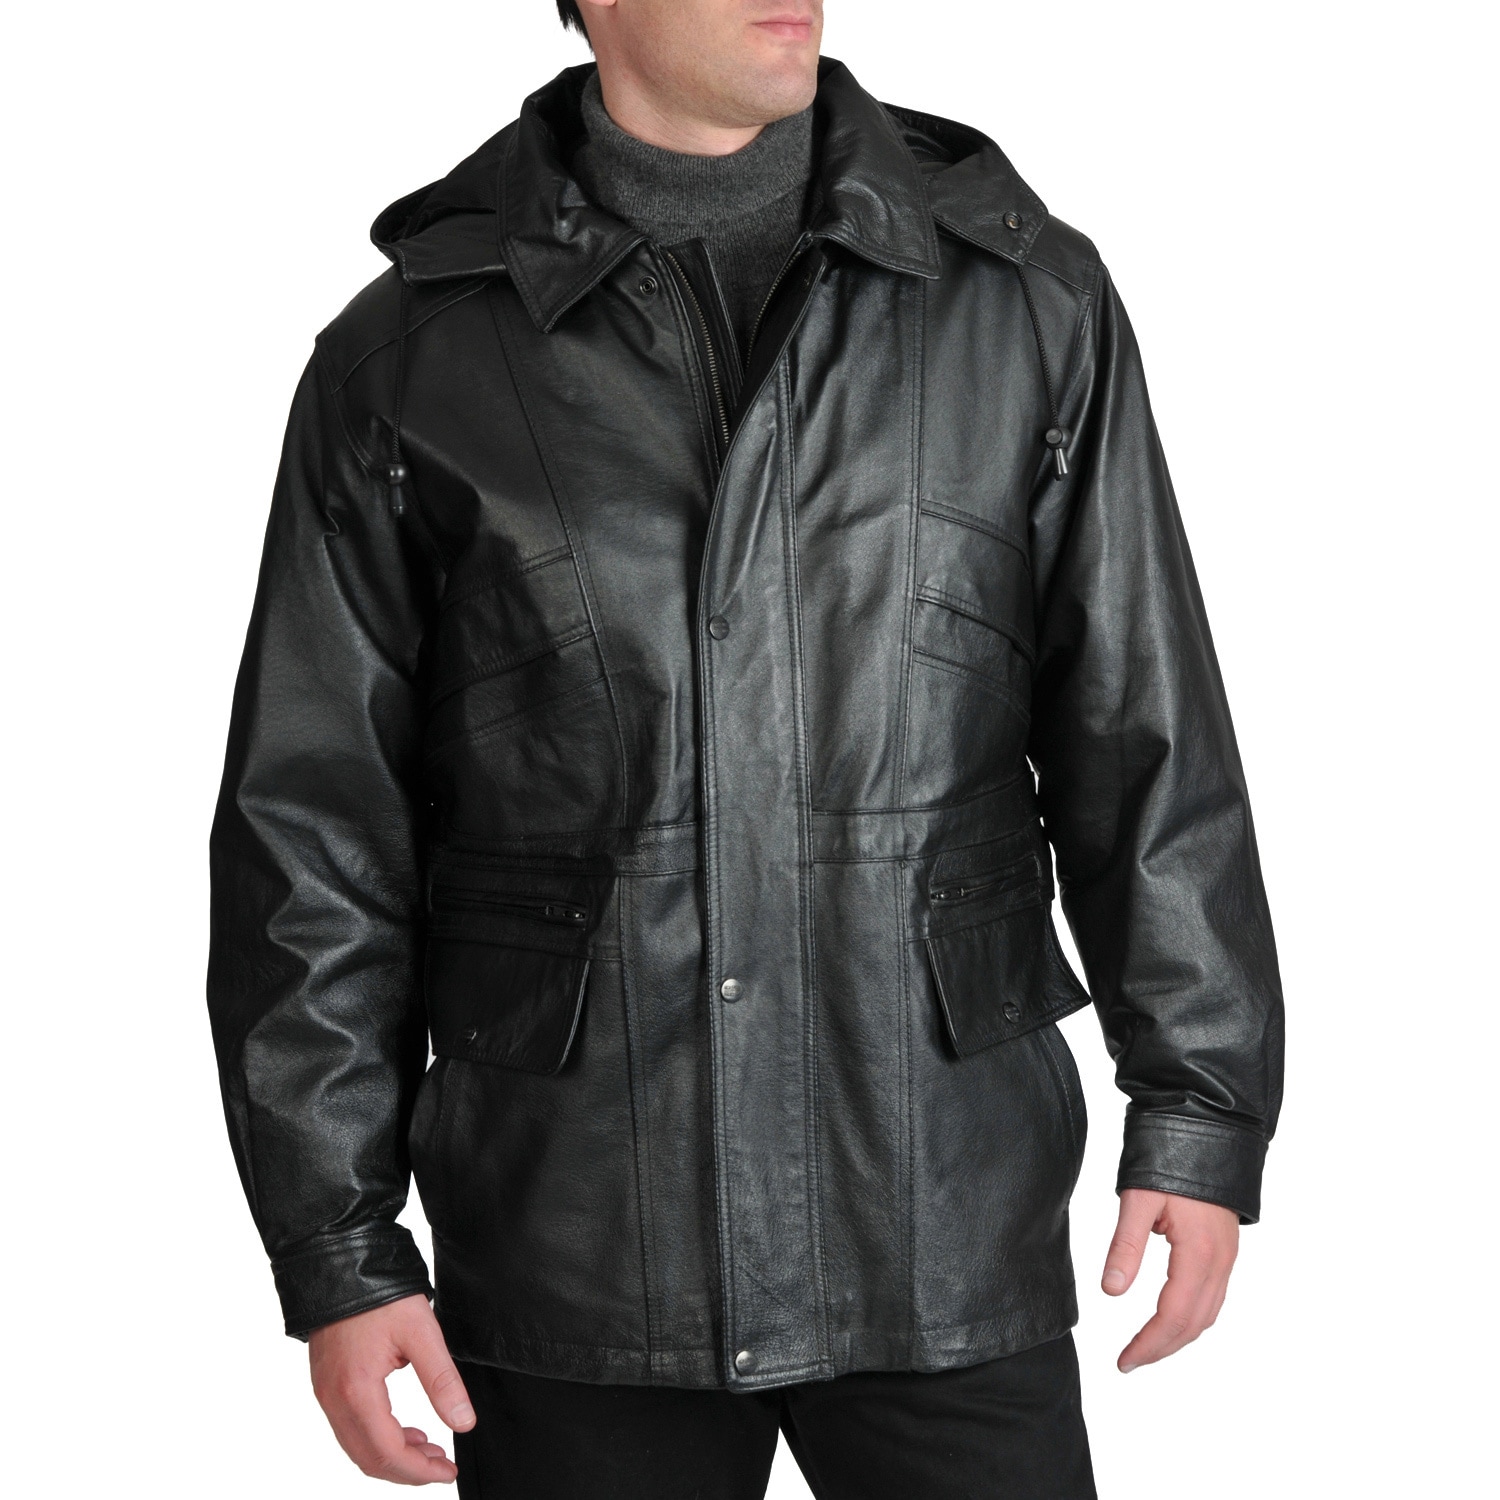 Excelled Men's Leather Parka with Removable Hood | eBay